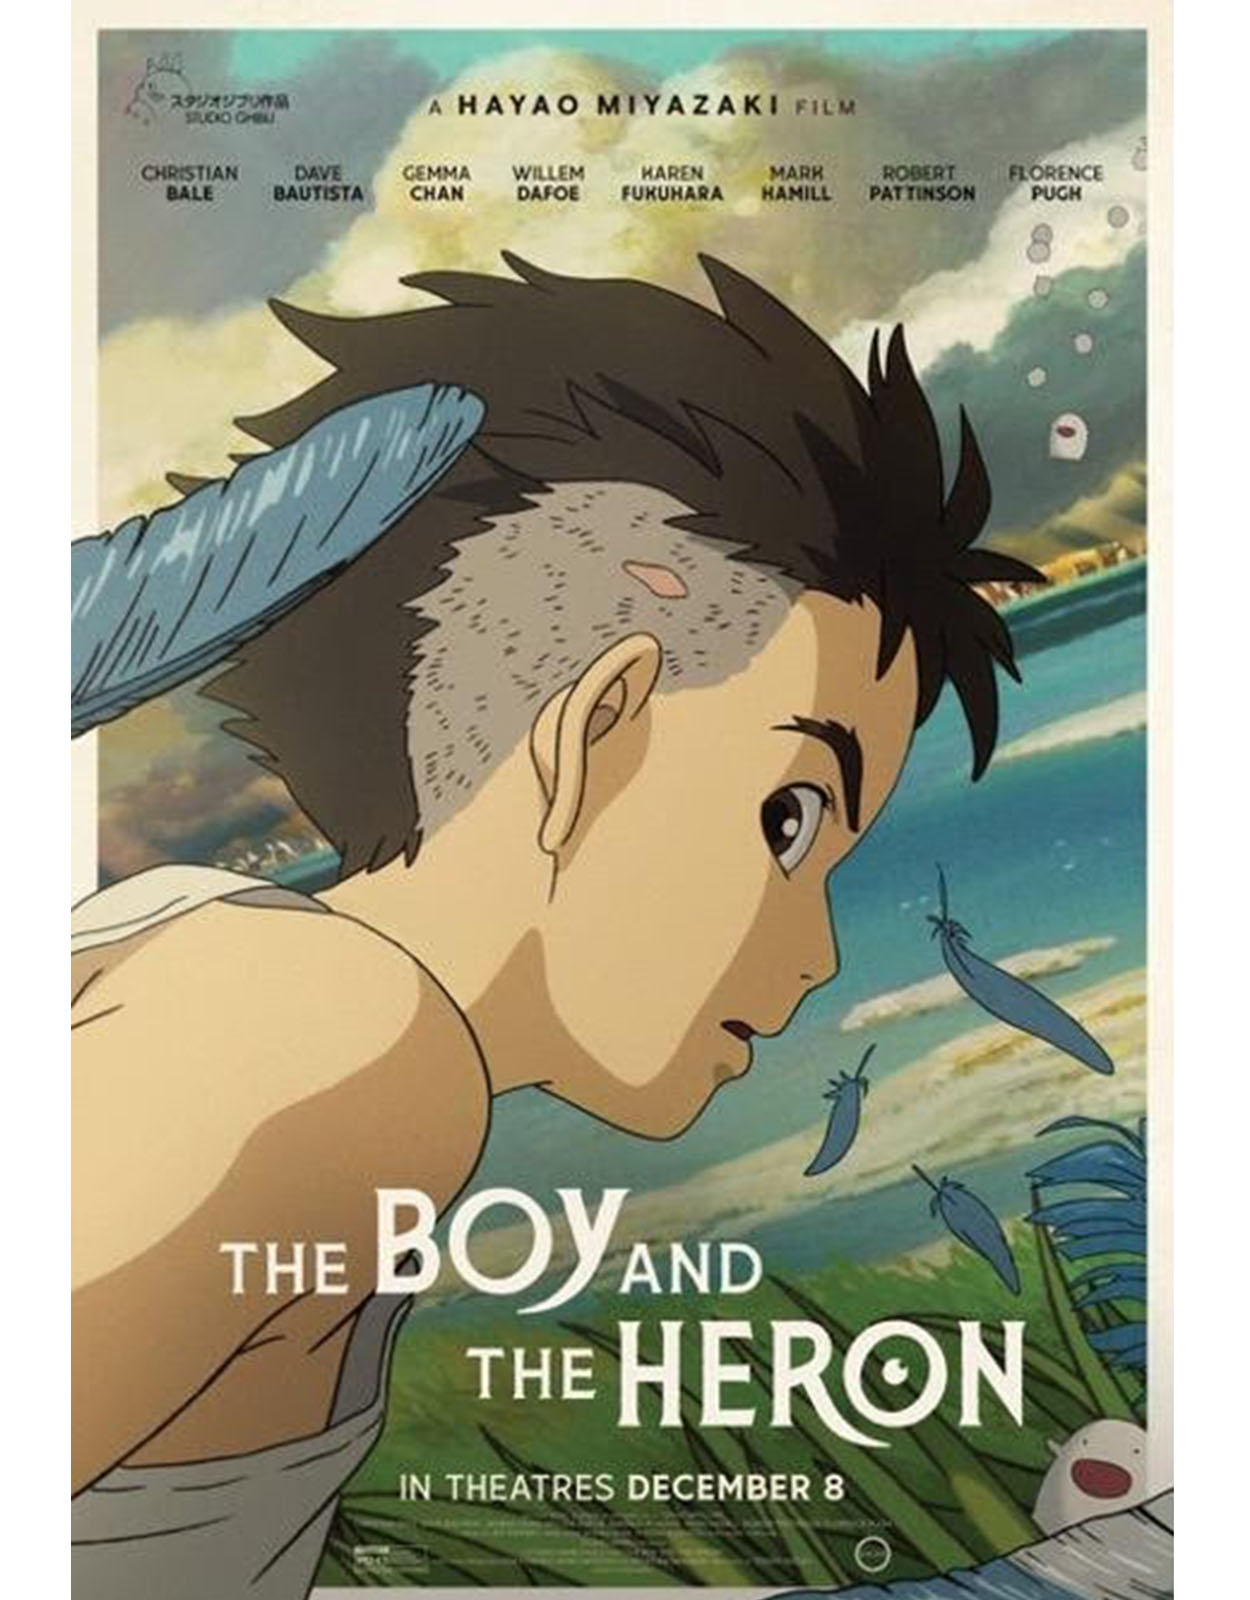 The Boy and The Heron promotial poster for international audiences